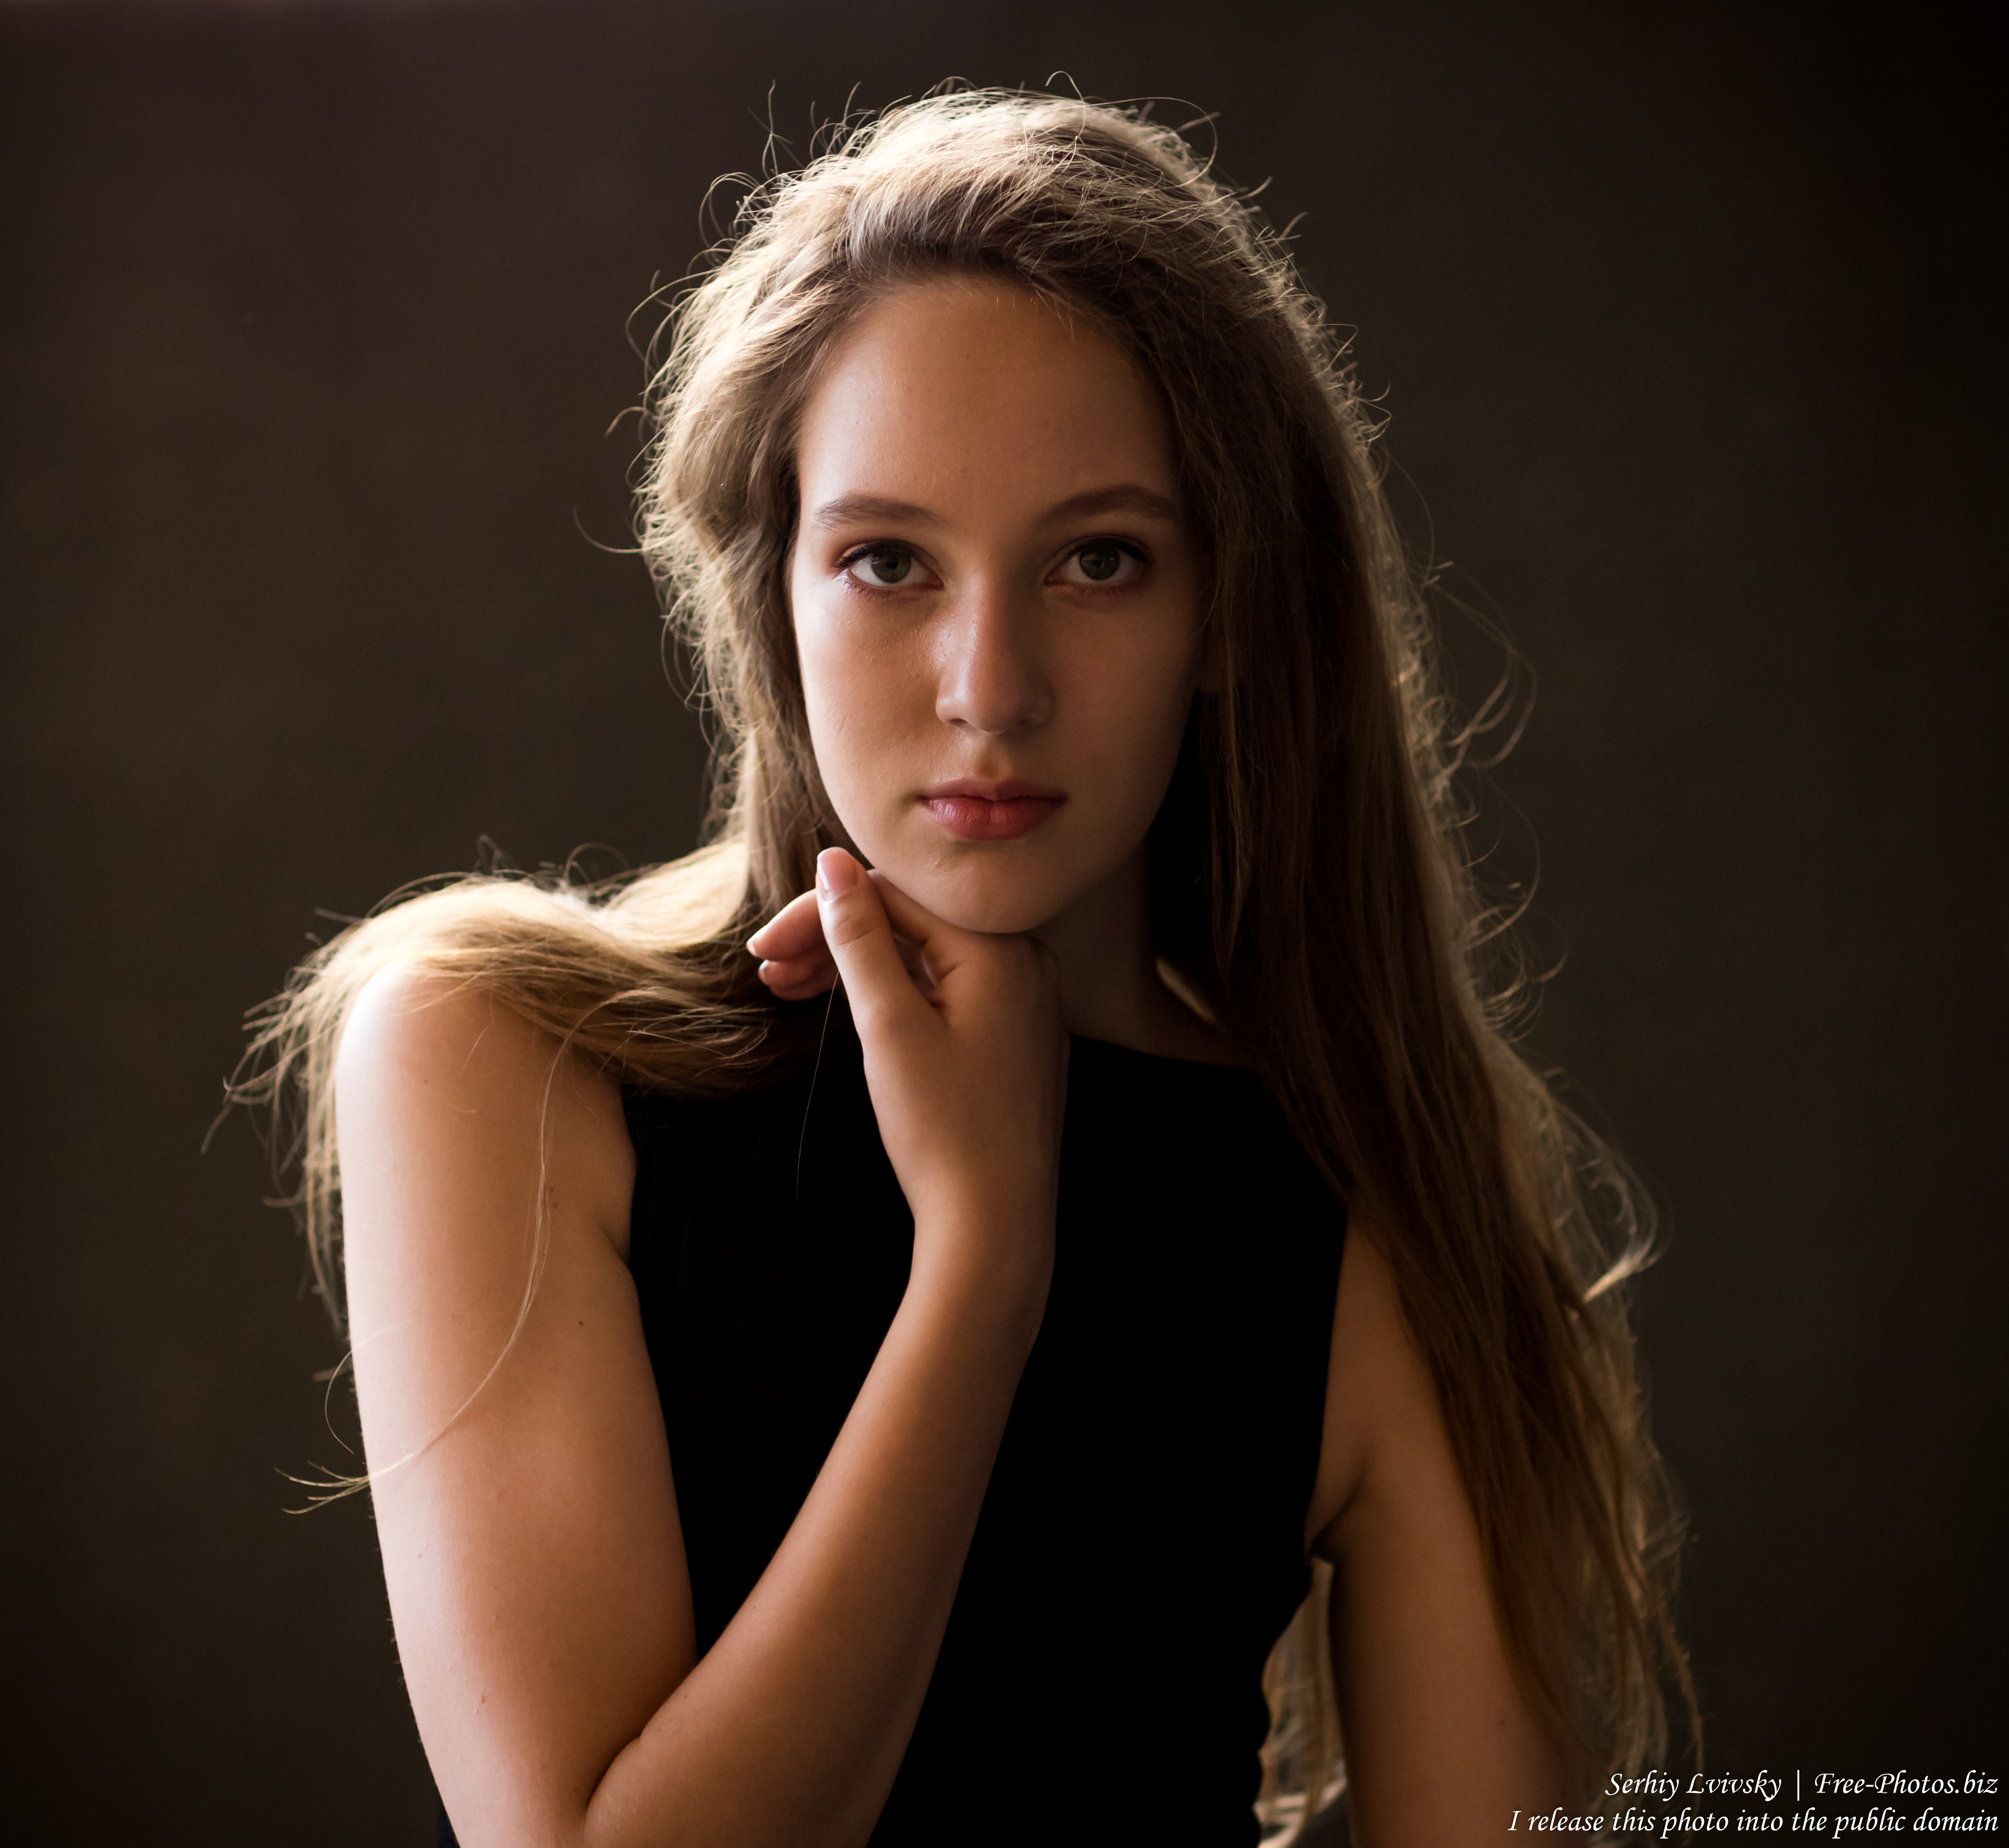 Nastia - a 16-year-old girl with natural fair hair photographed in June 2019 by Serhiy Lvivsky, picture 28